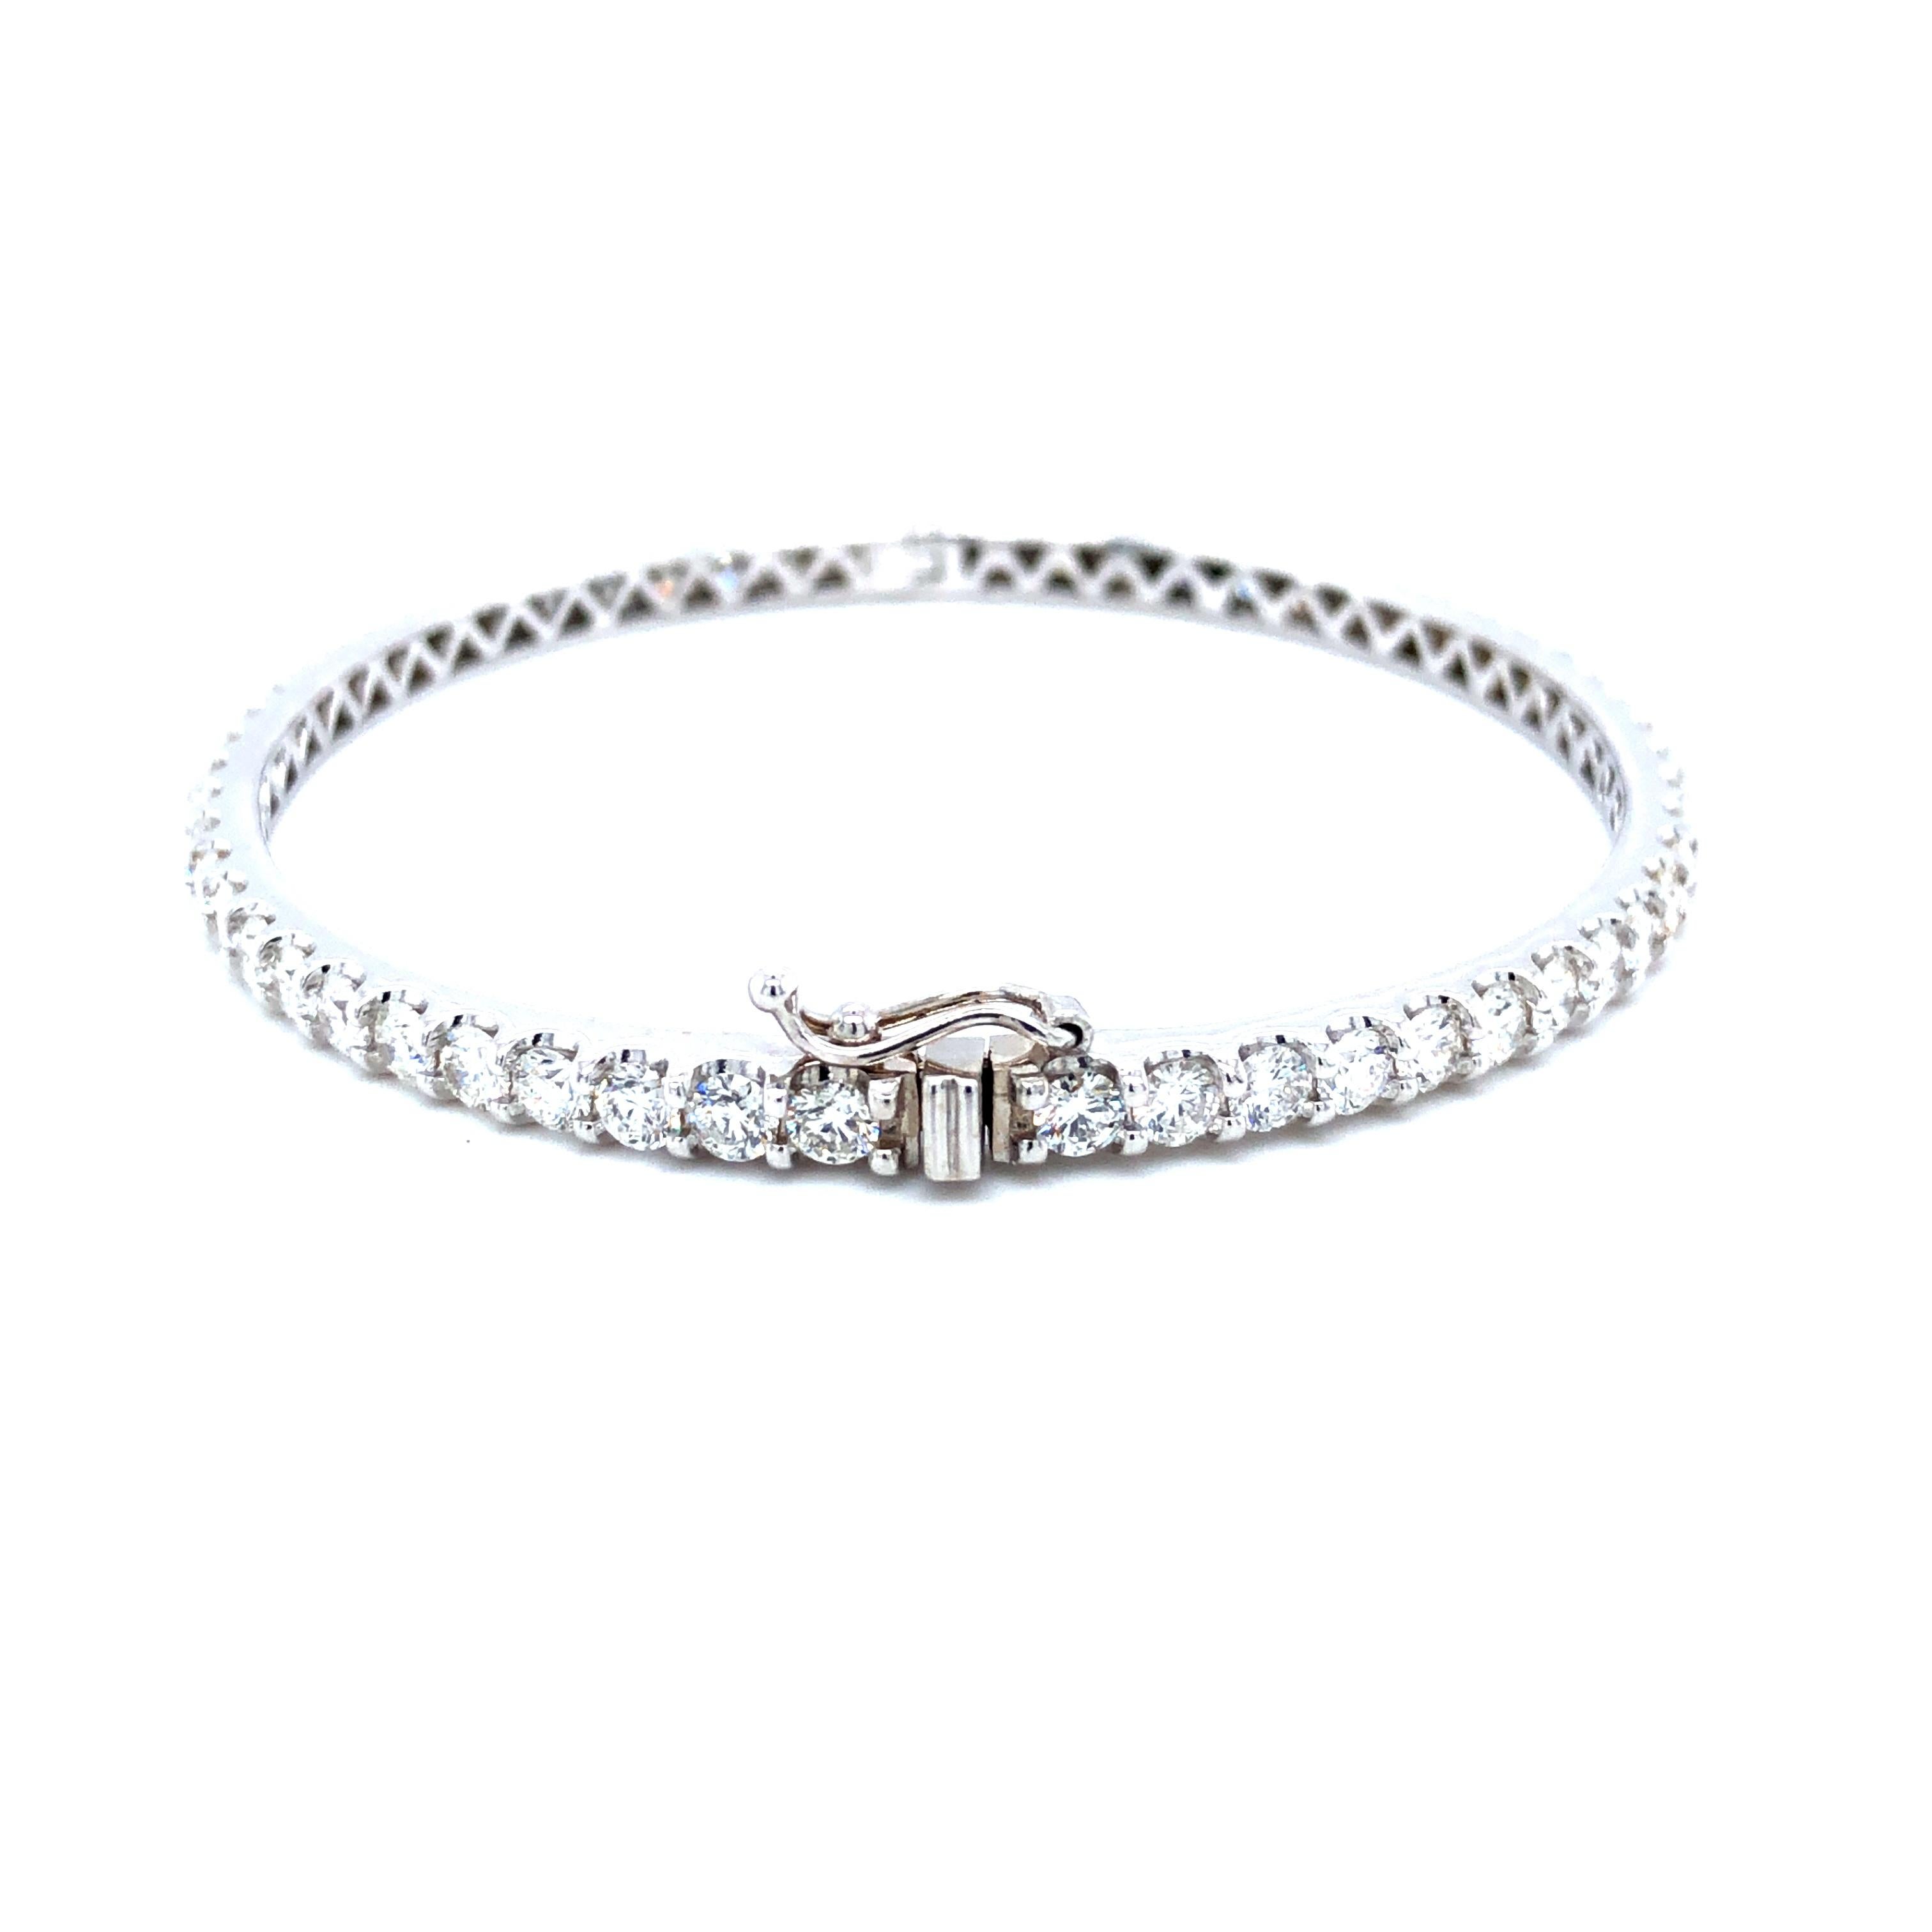 Offered here is a a gorgeous 5.50 carats all around diamond bangle set in 14kt gold. The bangle is set with 56 natural round brilliant cut diamonds all G color Vs2- Si1 in clarity with an estimated total diamond weight of 5.50 carats. The bangle is